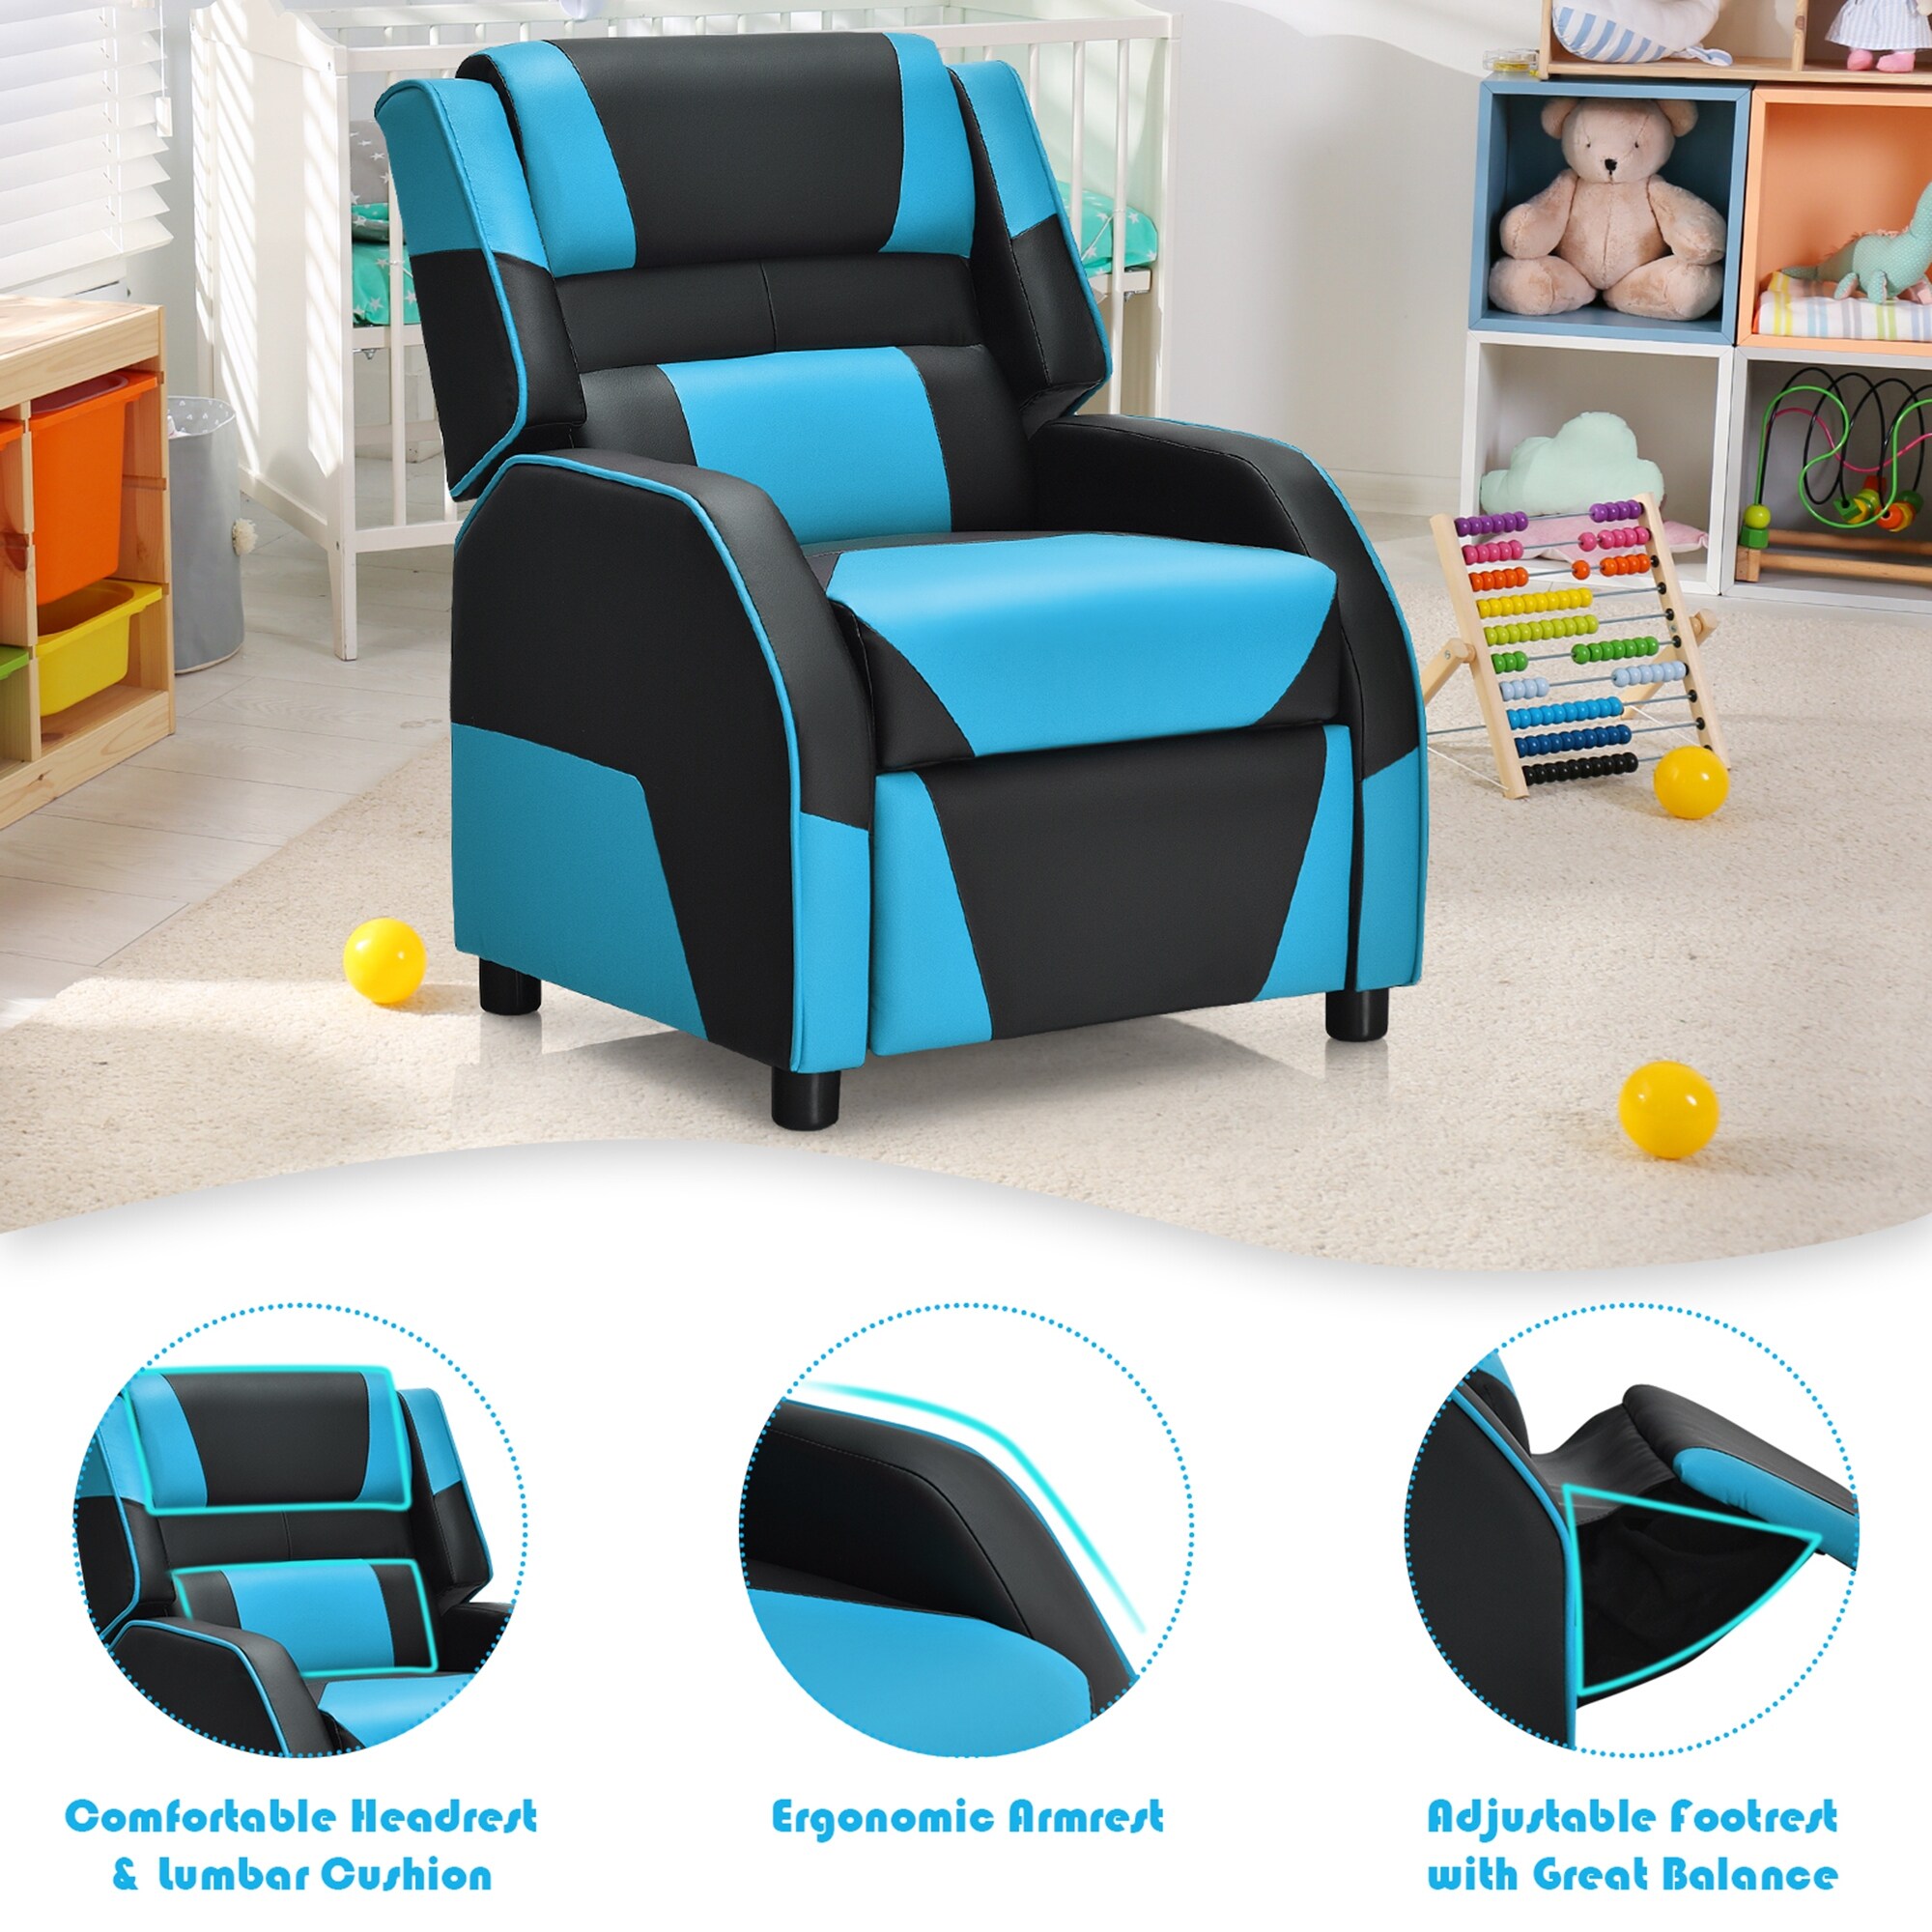 Kids Floor Chair FOME HOME Adjustable 6-Position Memory Foam Kids Folding Sofa Kids Padded Gaming Chair Lounge Chair Floor Sofa Indoor Comfortable Back Support for a Reading Playing Watching TV 